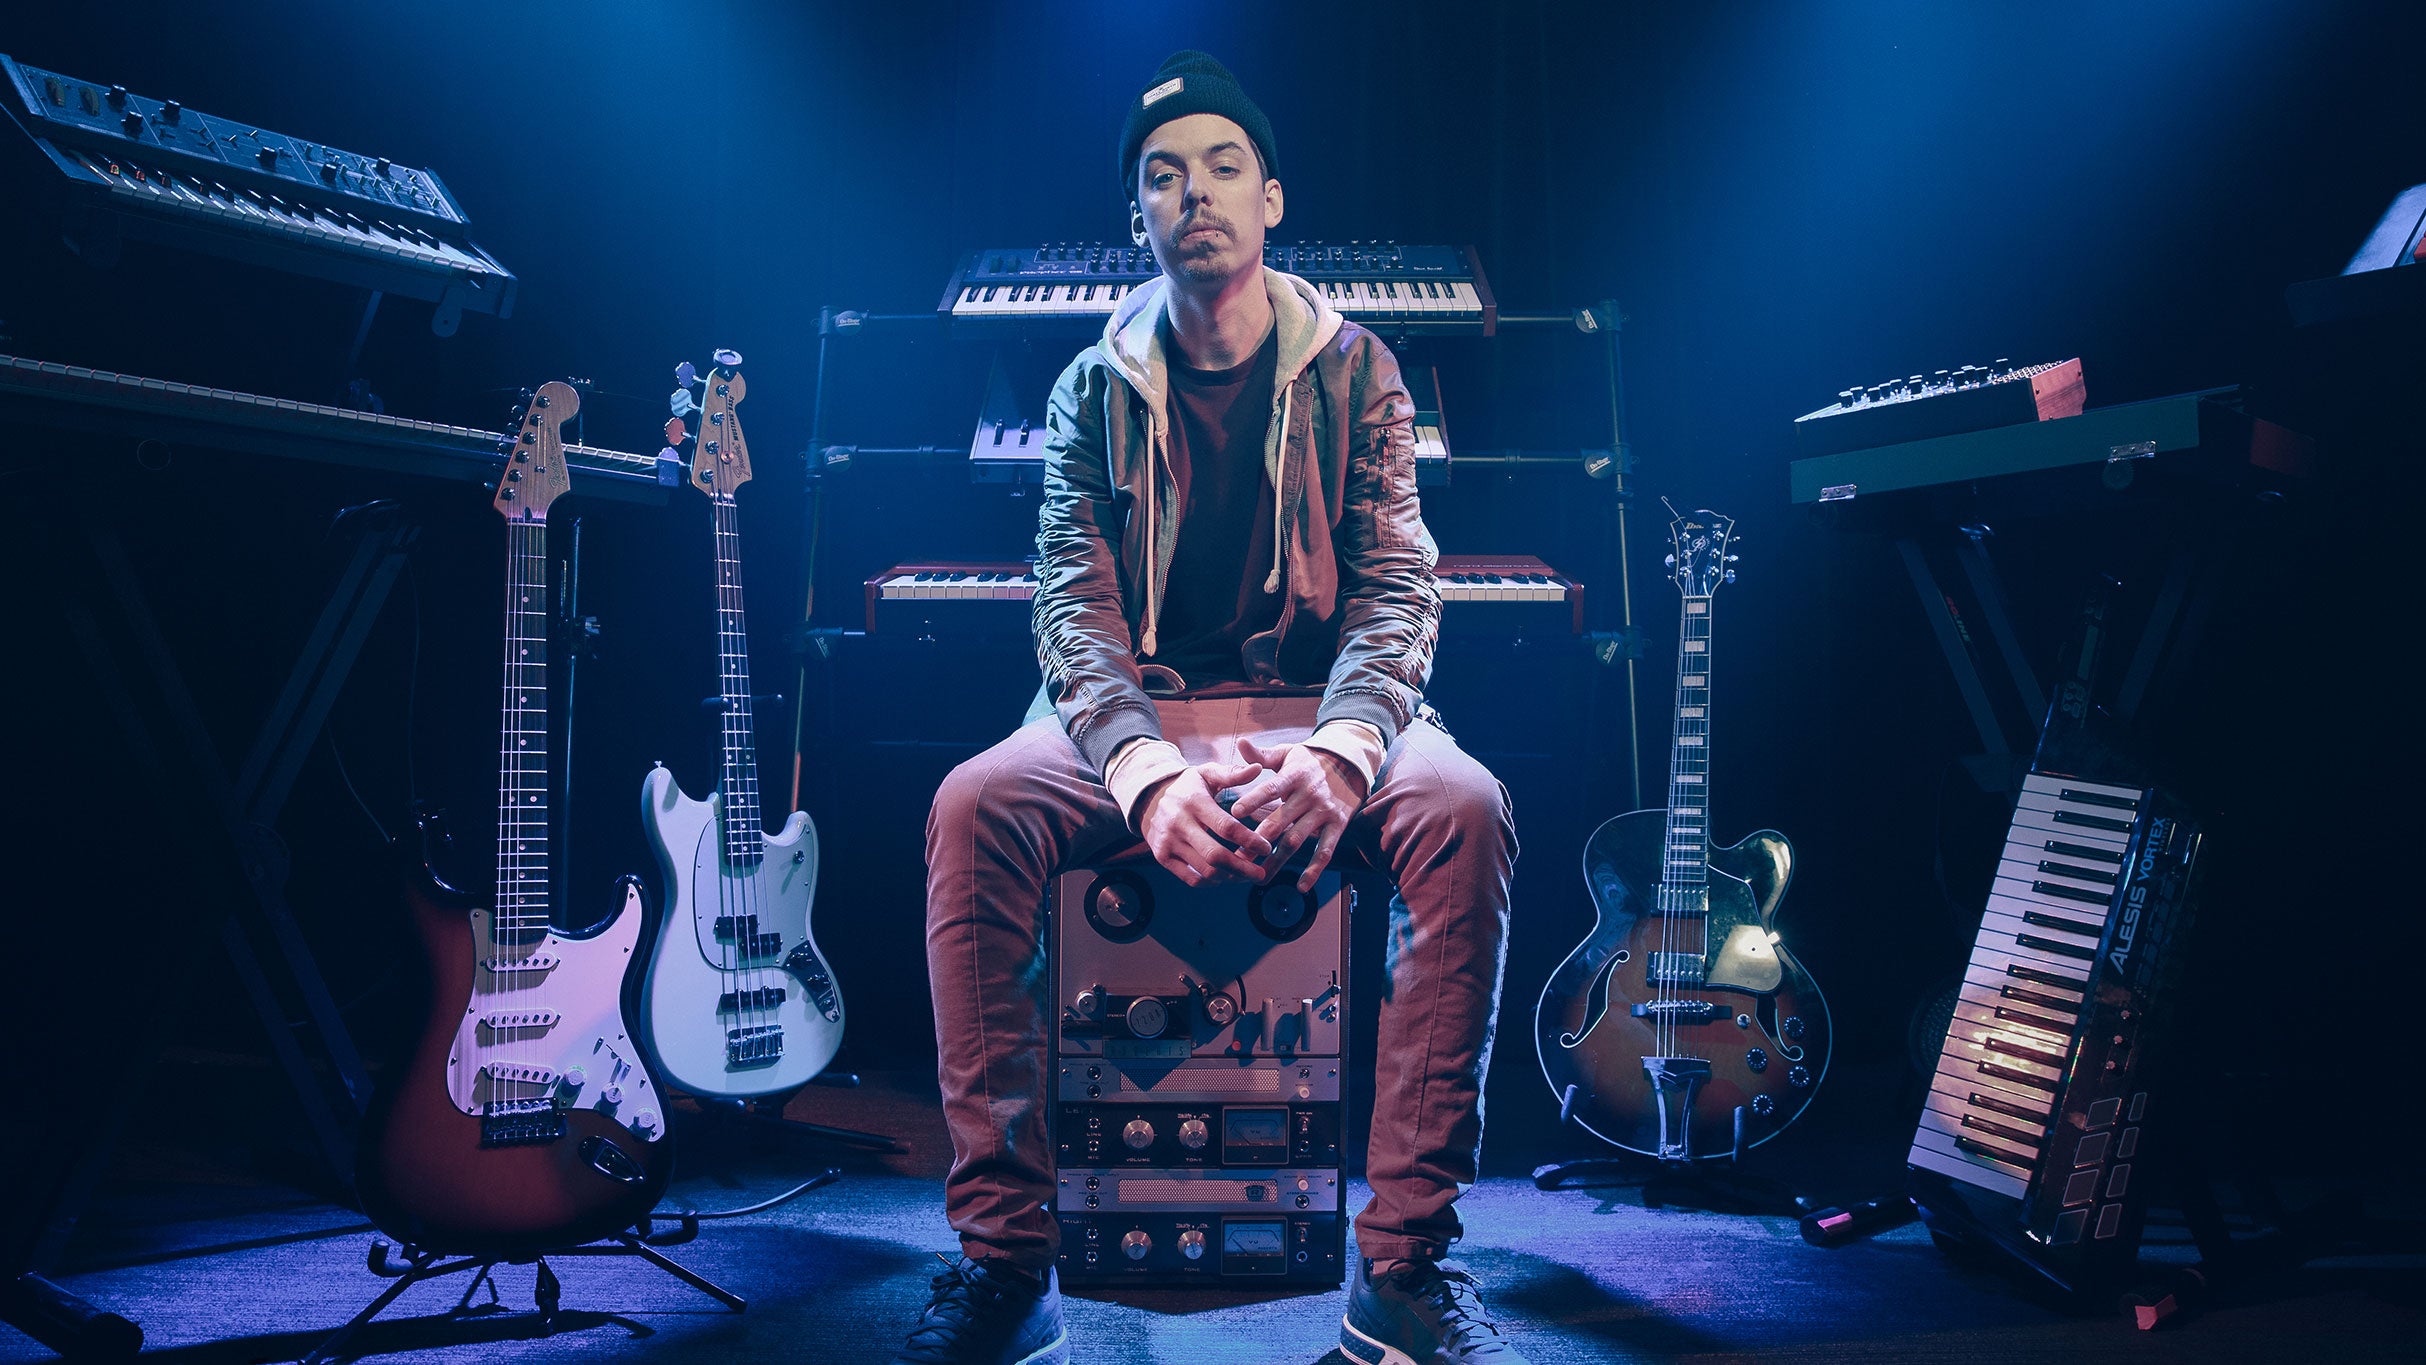 Grieves @ 191 Toole in Tucson promo photo for Member presale offer code